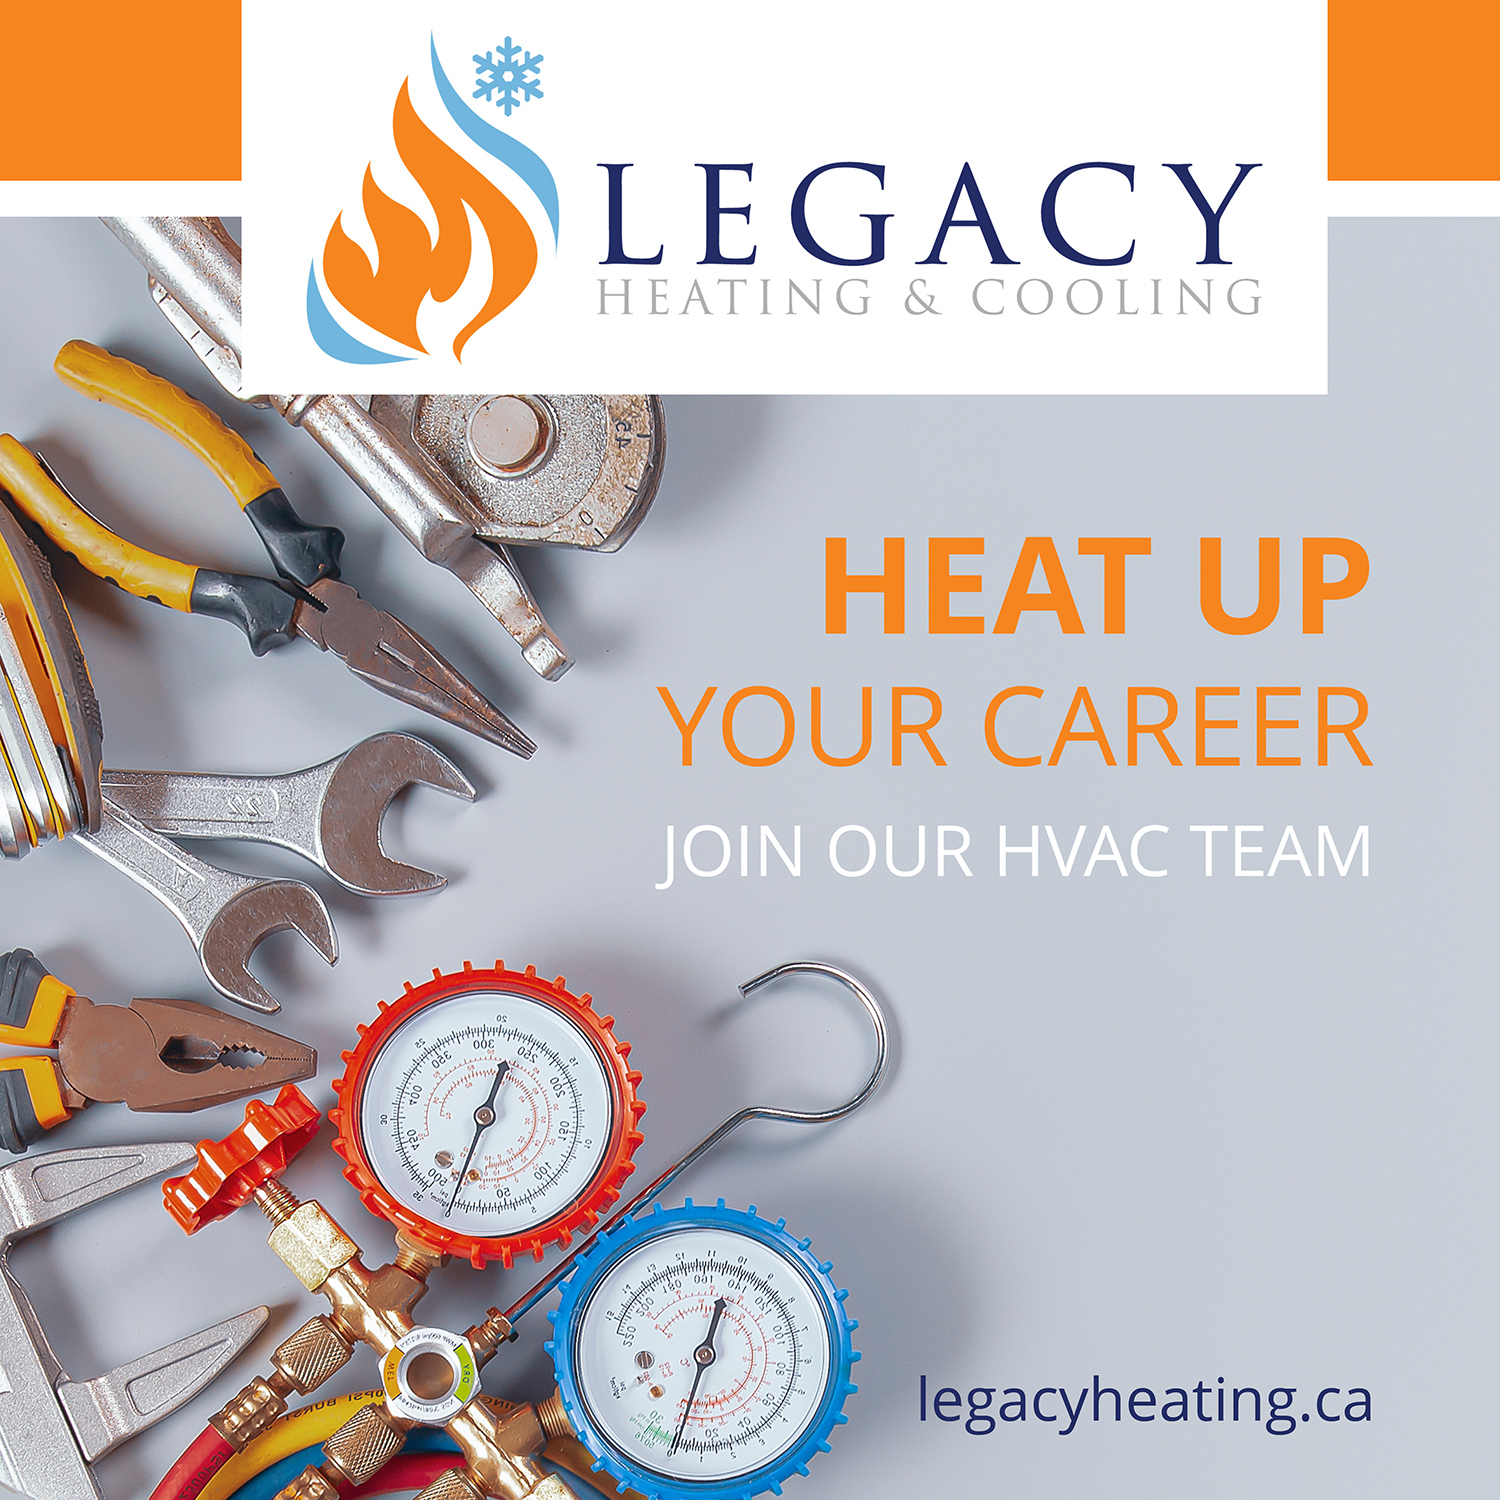 A bunch of tools such as wrenches, pliers and other tools used for HVAC professions, gathered in an arc with a tagline that says "Heat Up Your career: join our HVAC team"